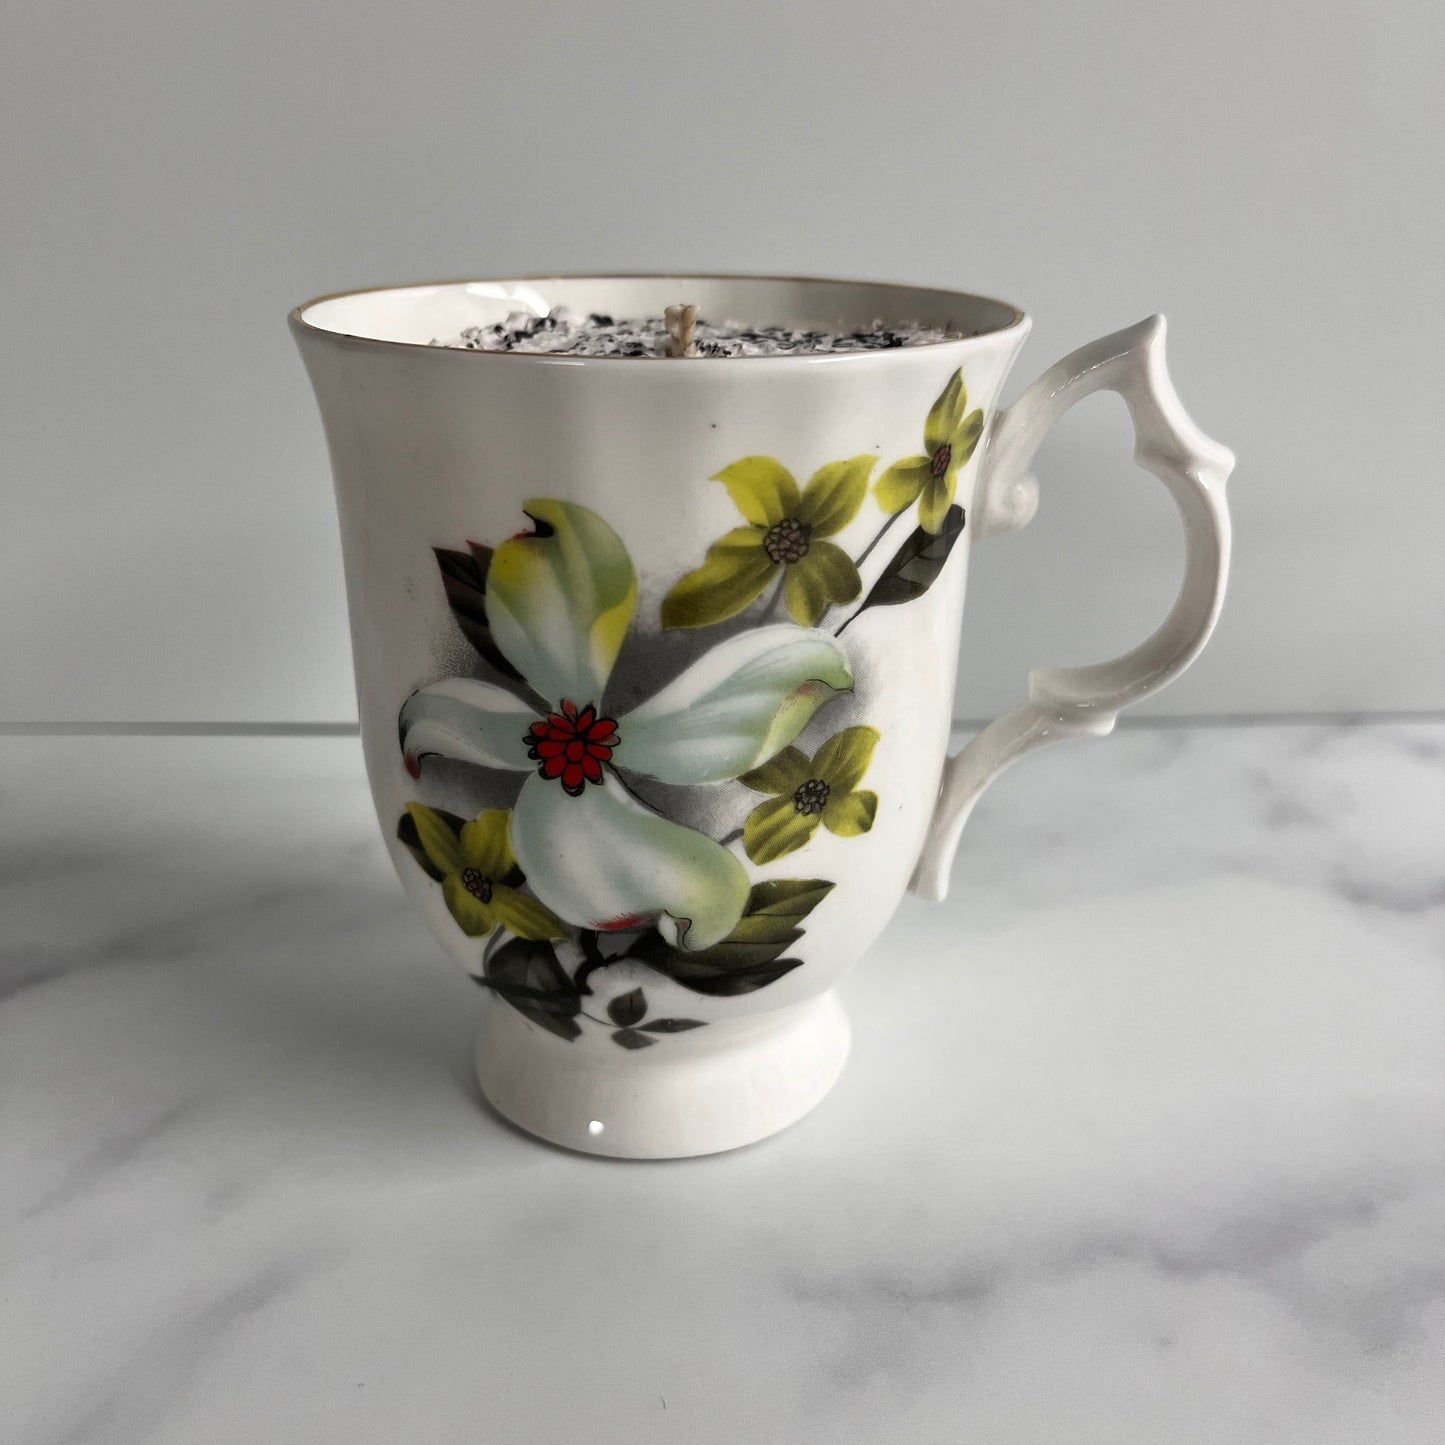 Magnolia Motif Teacup - Mary Todd Lincoln